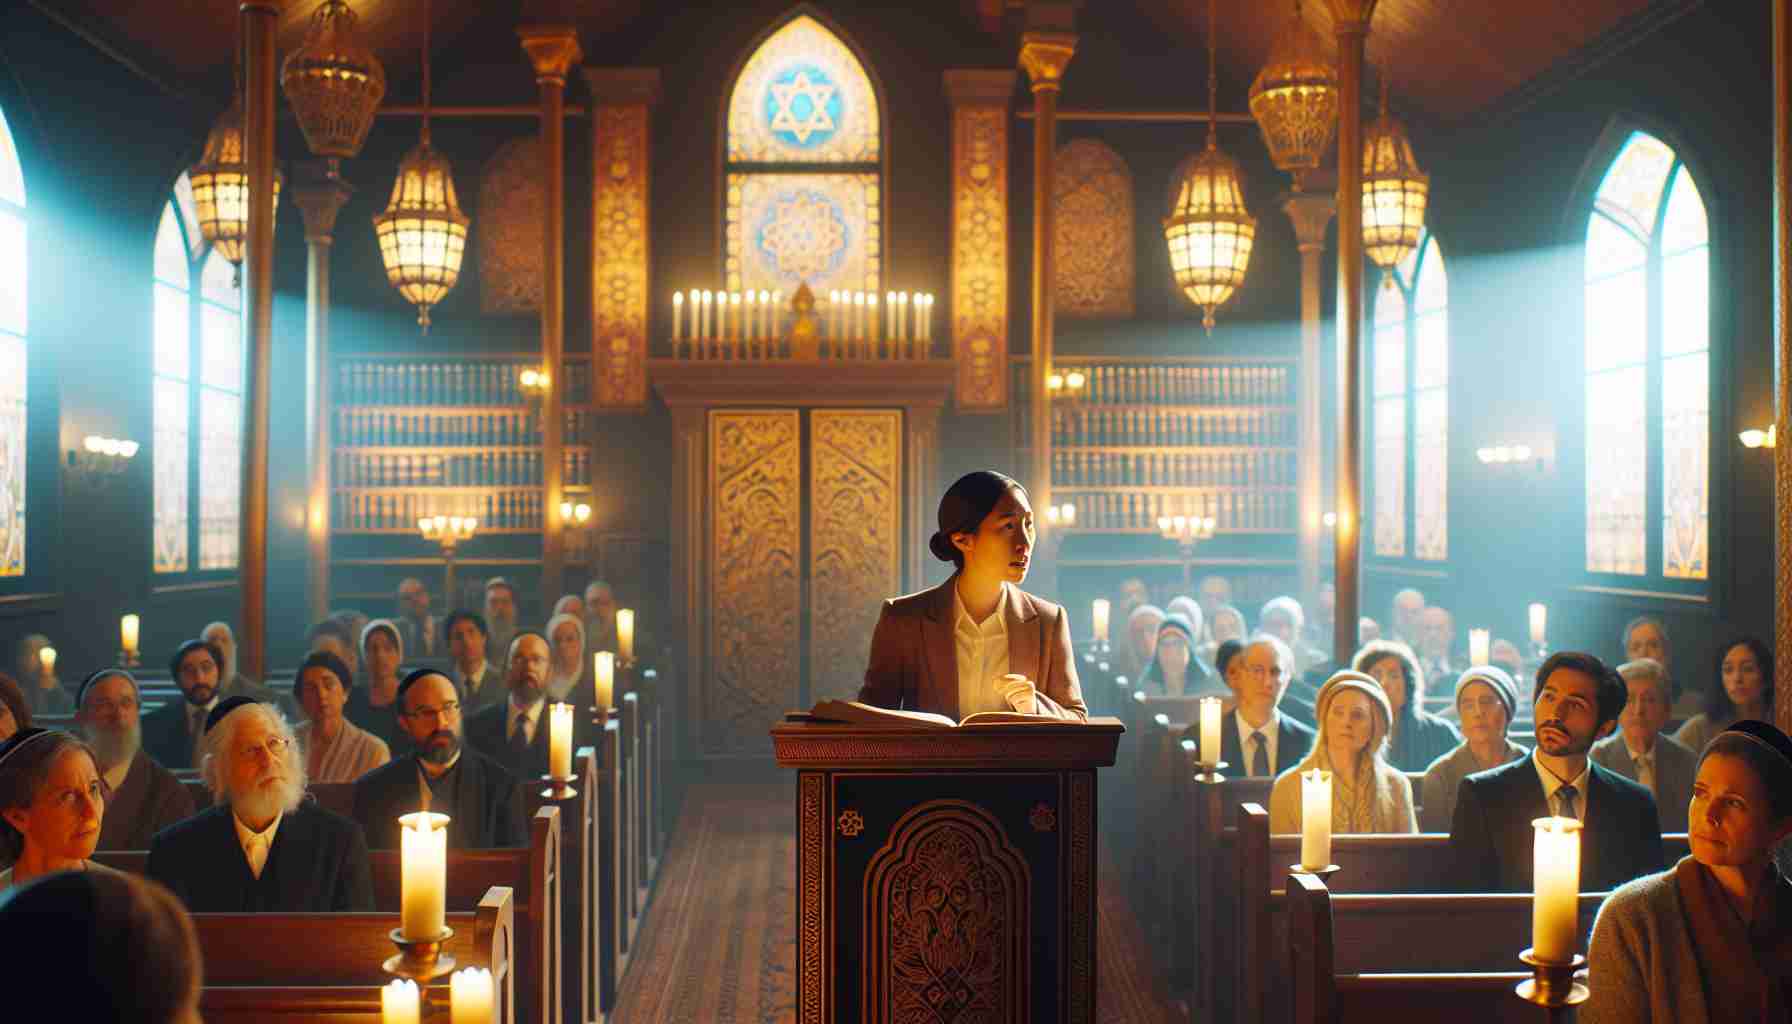 Generate a realistic HD photo of a trailblazing Rabbi who is known for their inclusive work. The setting is a peaceful synagogue, filled with warm lighting and beautiful stained glass windows. The Rabbi, a woman of Asian descent, stands at the pulpit, a passionate expression on her face. Behind her, the ark doors partially open, revealing the sacred Torah scrolls. Ethnically diverse congregants attentively listen, reflecting the Rabbi's commitment to inclusivity. The aura of the scene radiates serenity and respect, epitomizing the Rabbi's legacy.